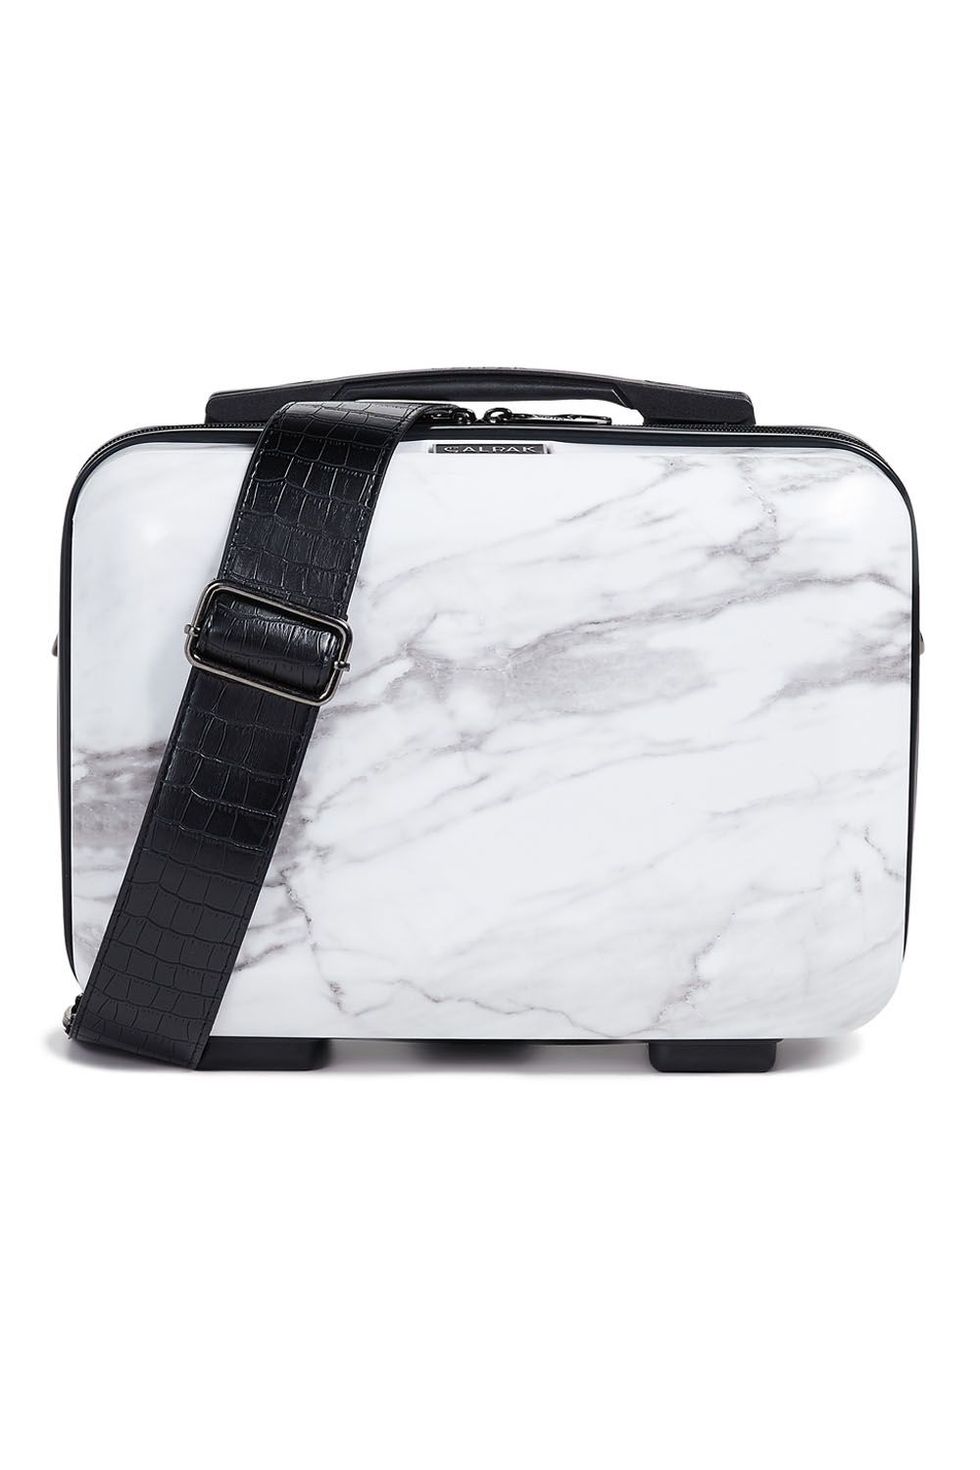 10 Cute Makeup Bags for 2020 - Best Cosmetic Cases